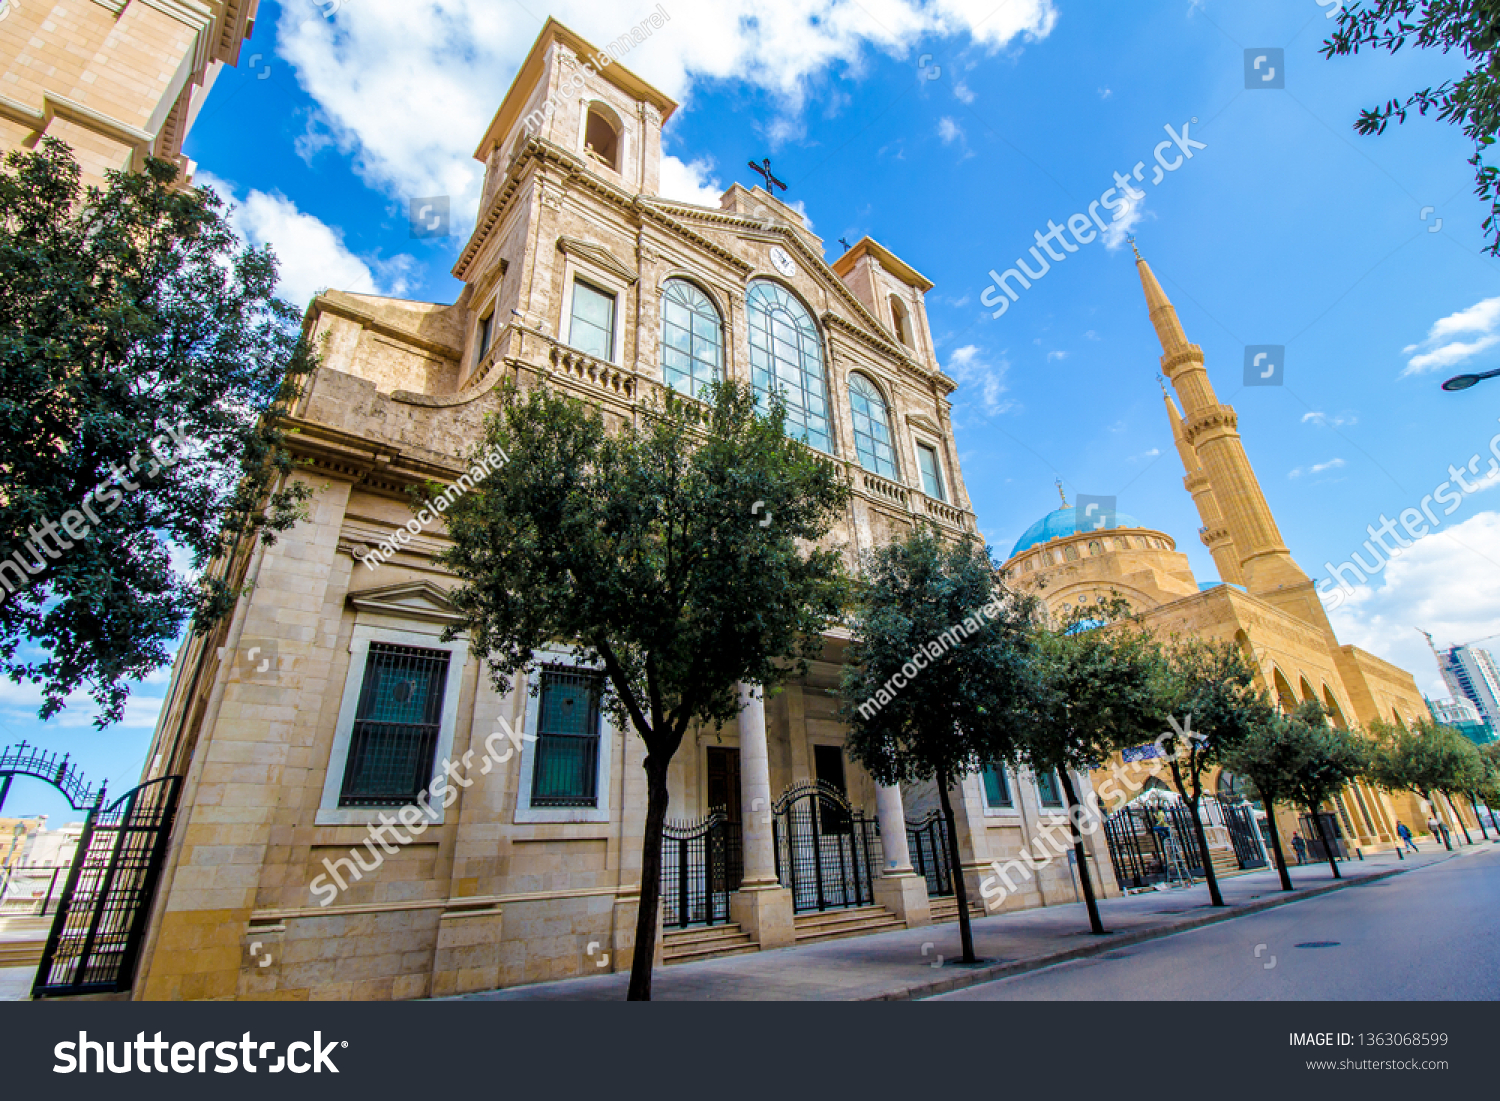 Church of Saint George Maronite and Mohammad Al-Amin Mosque coexist side by side in Downtown Beirut, Lebanon #1363068599